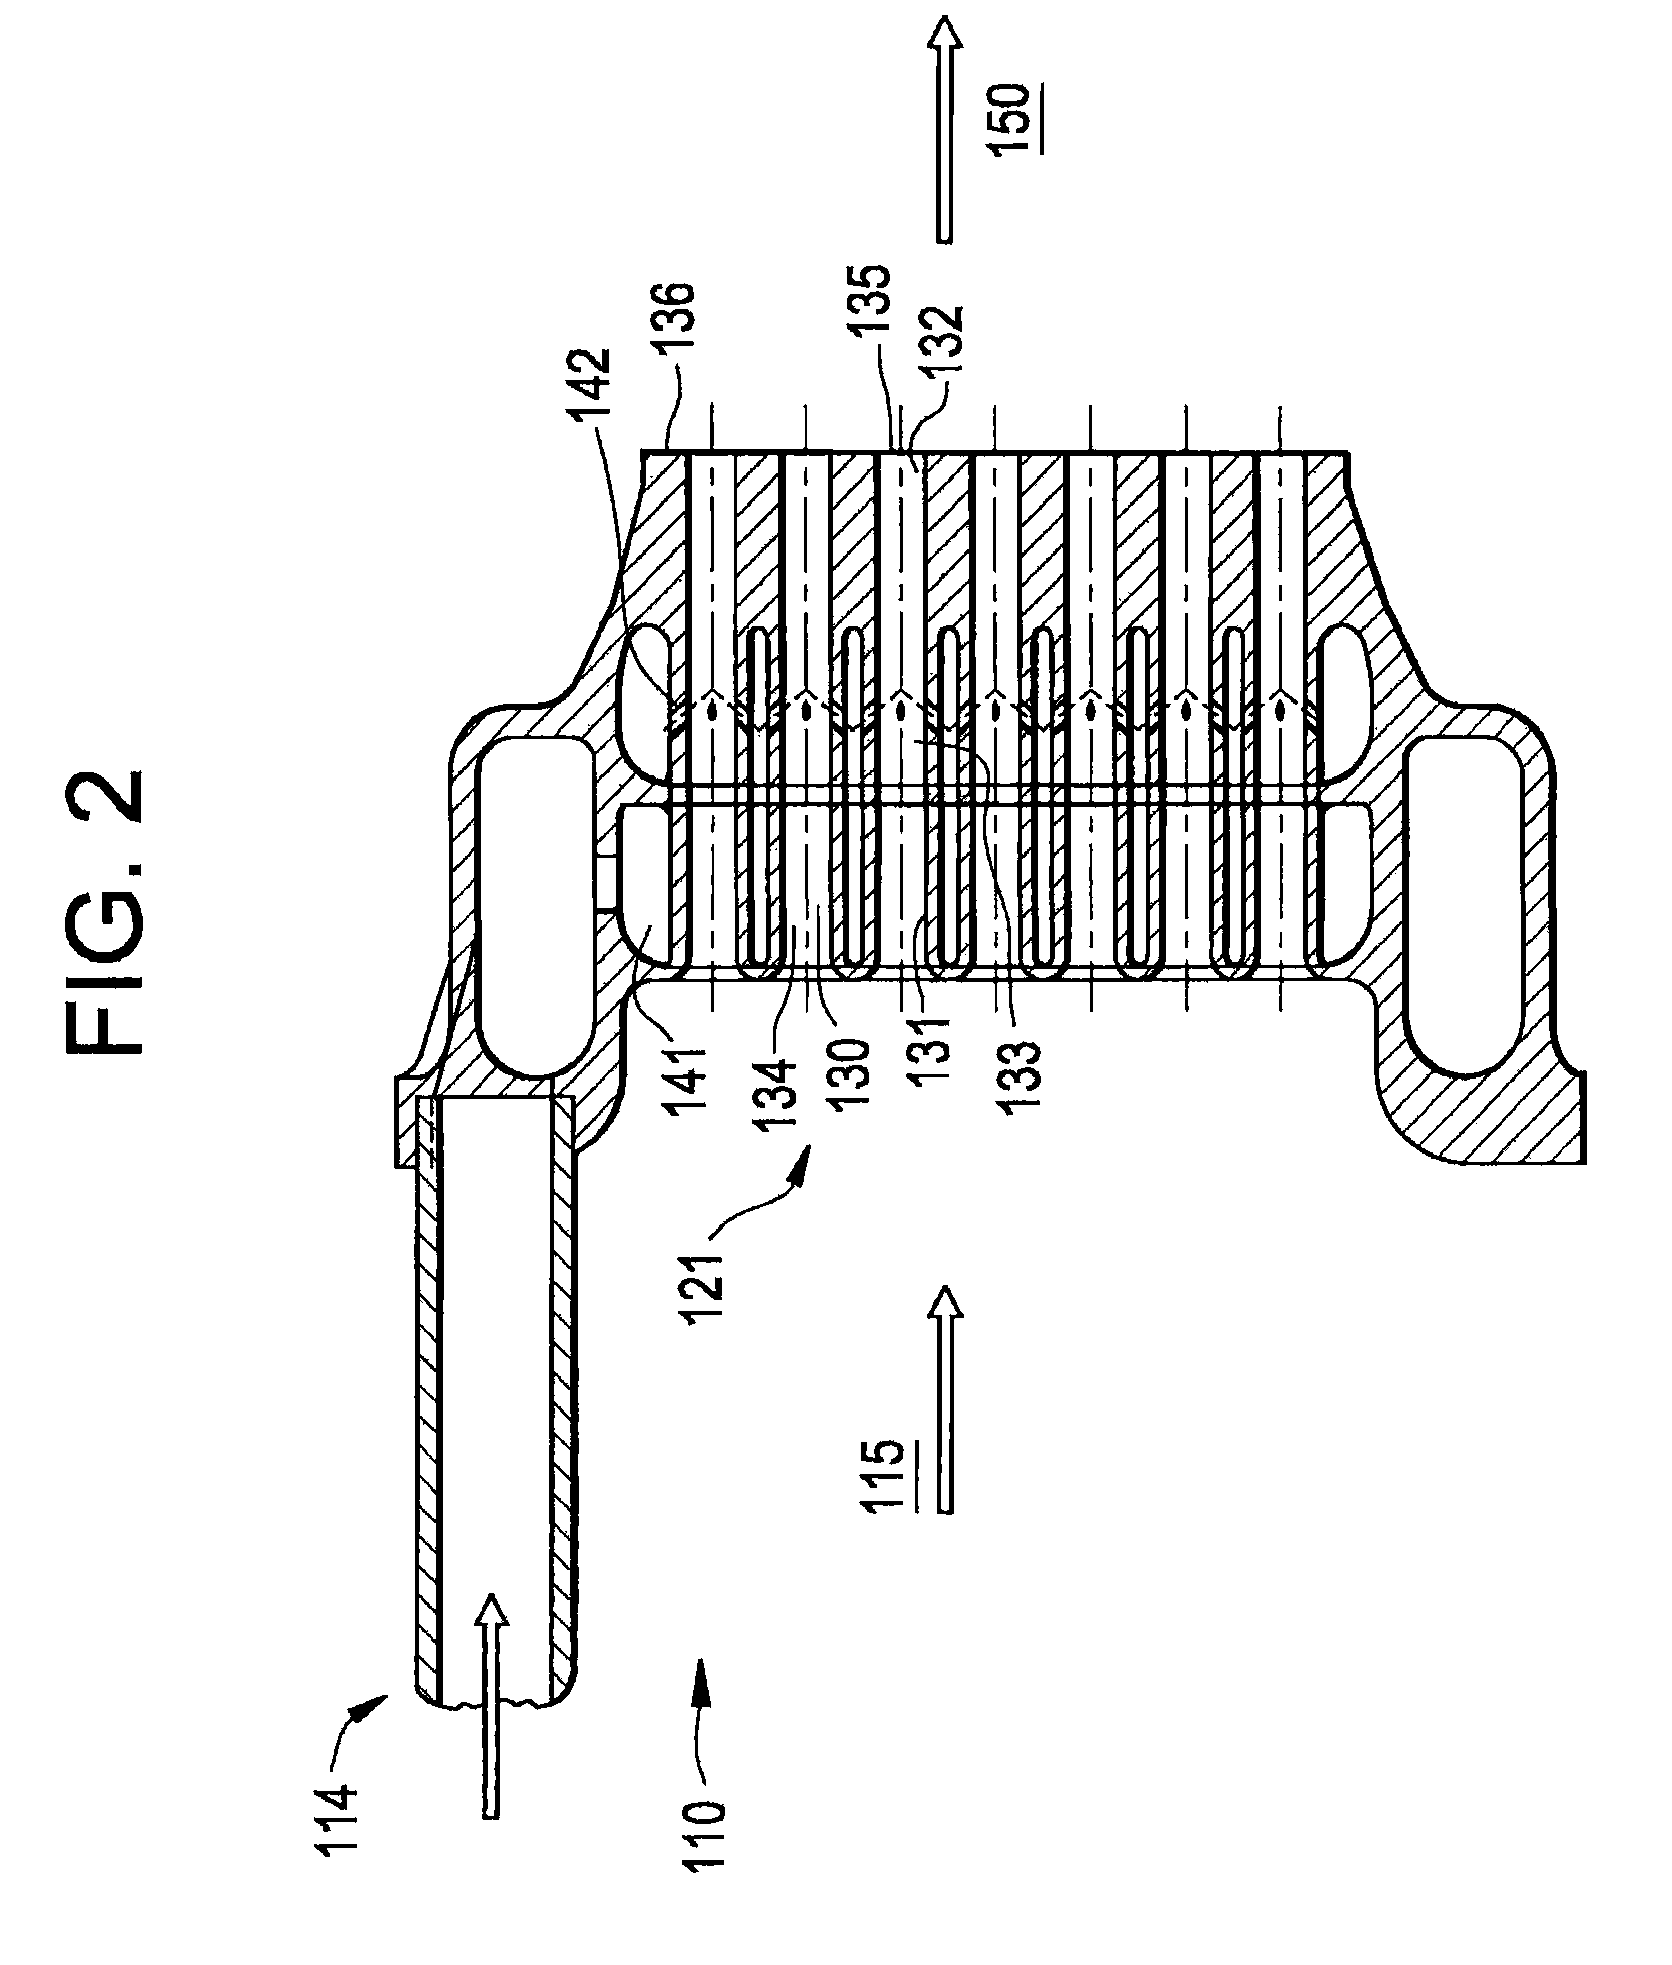 Premixed direct injection nozzle for highly reactive fuels